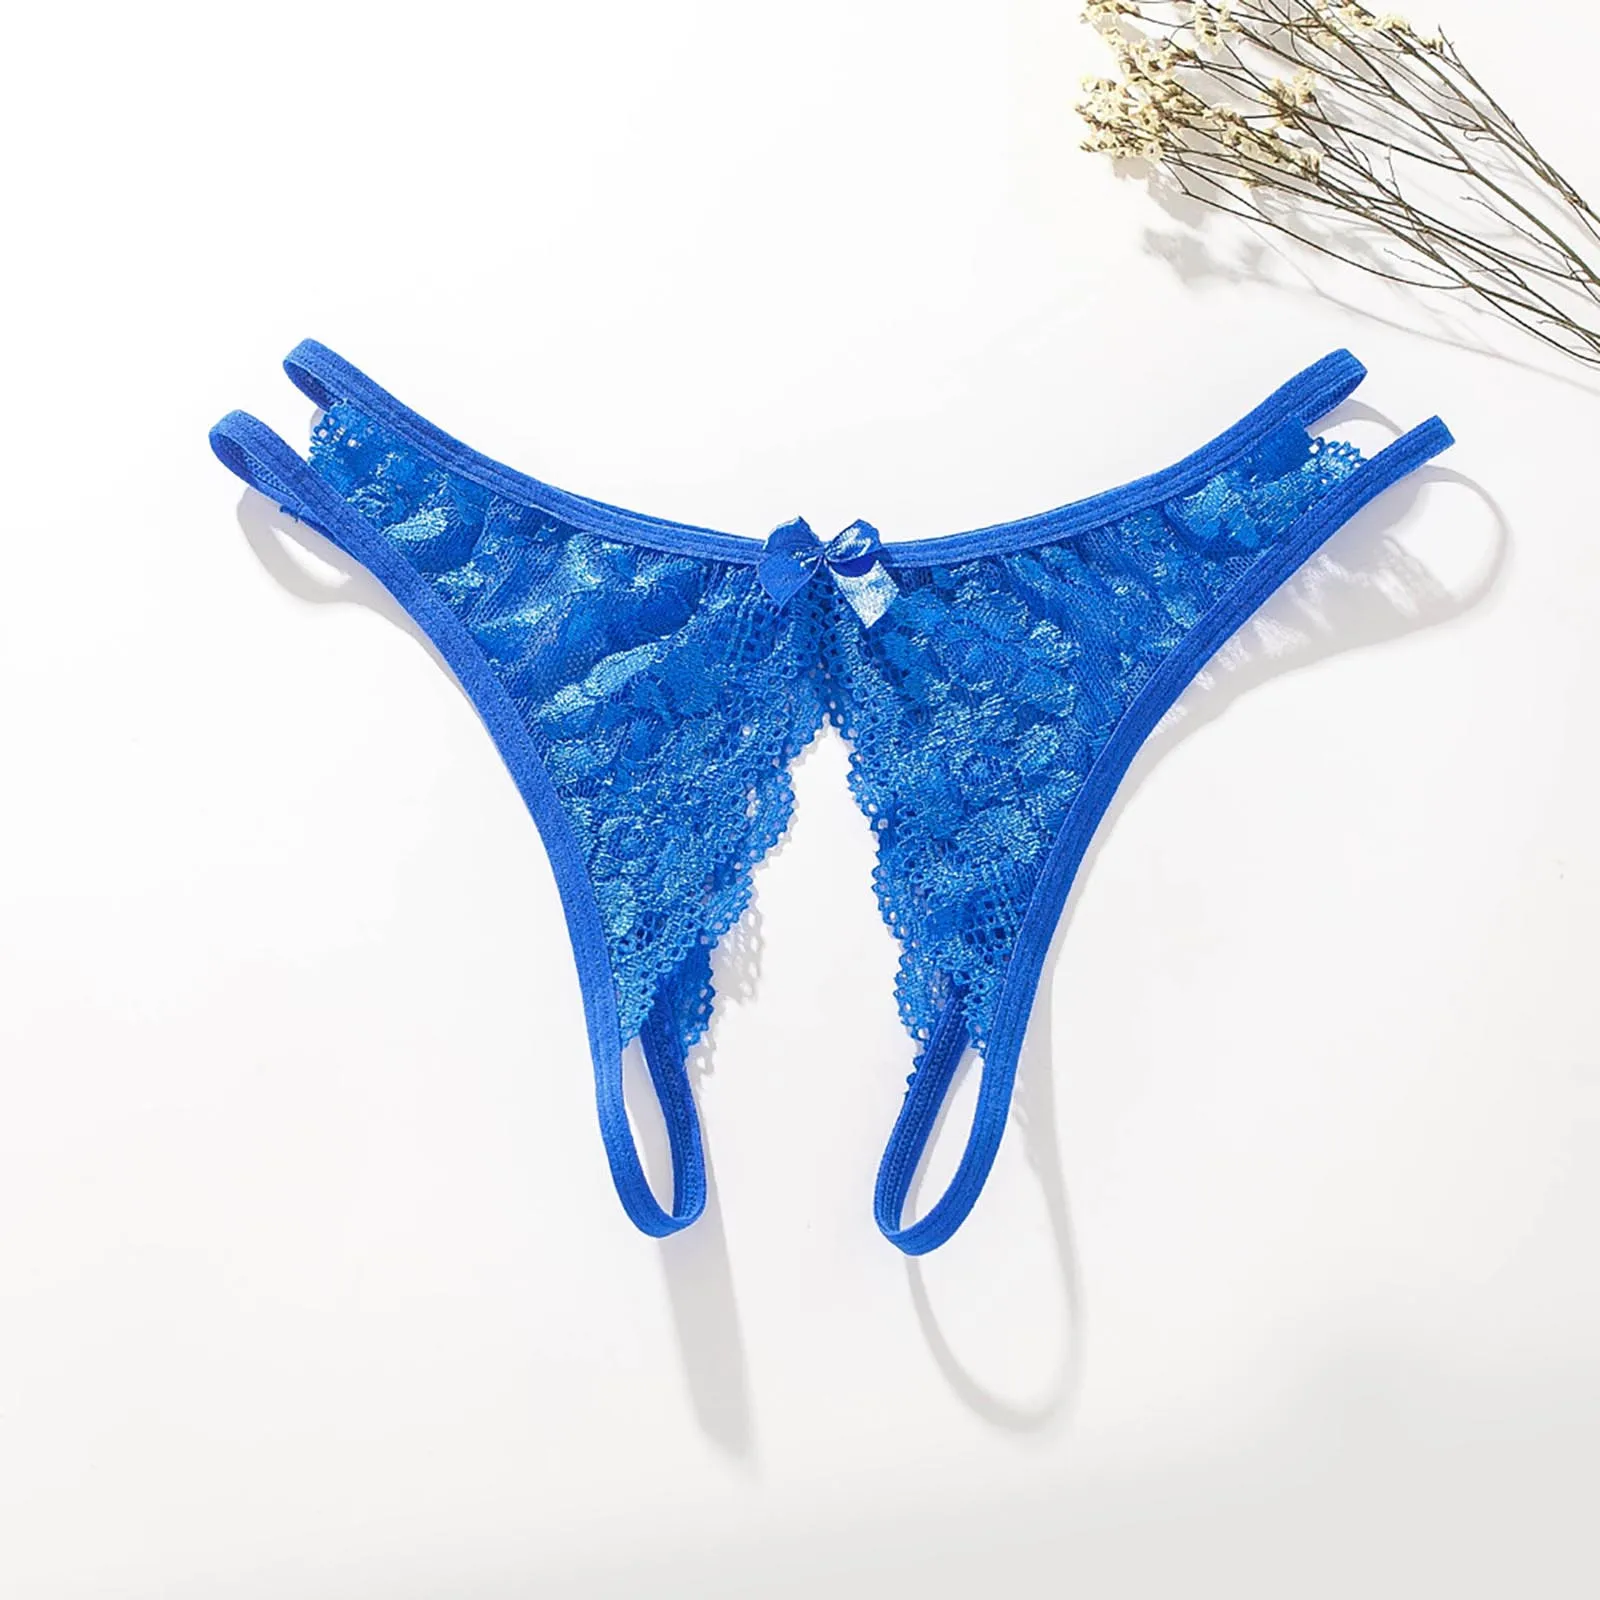 Crotchless Panties For Women Plus Size Sexy Transparent Lace Open